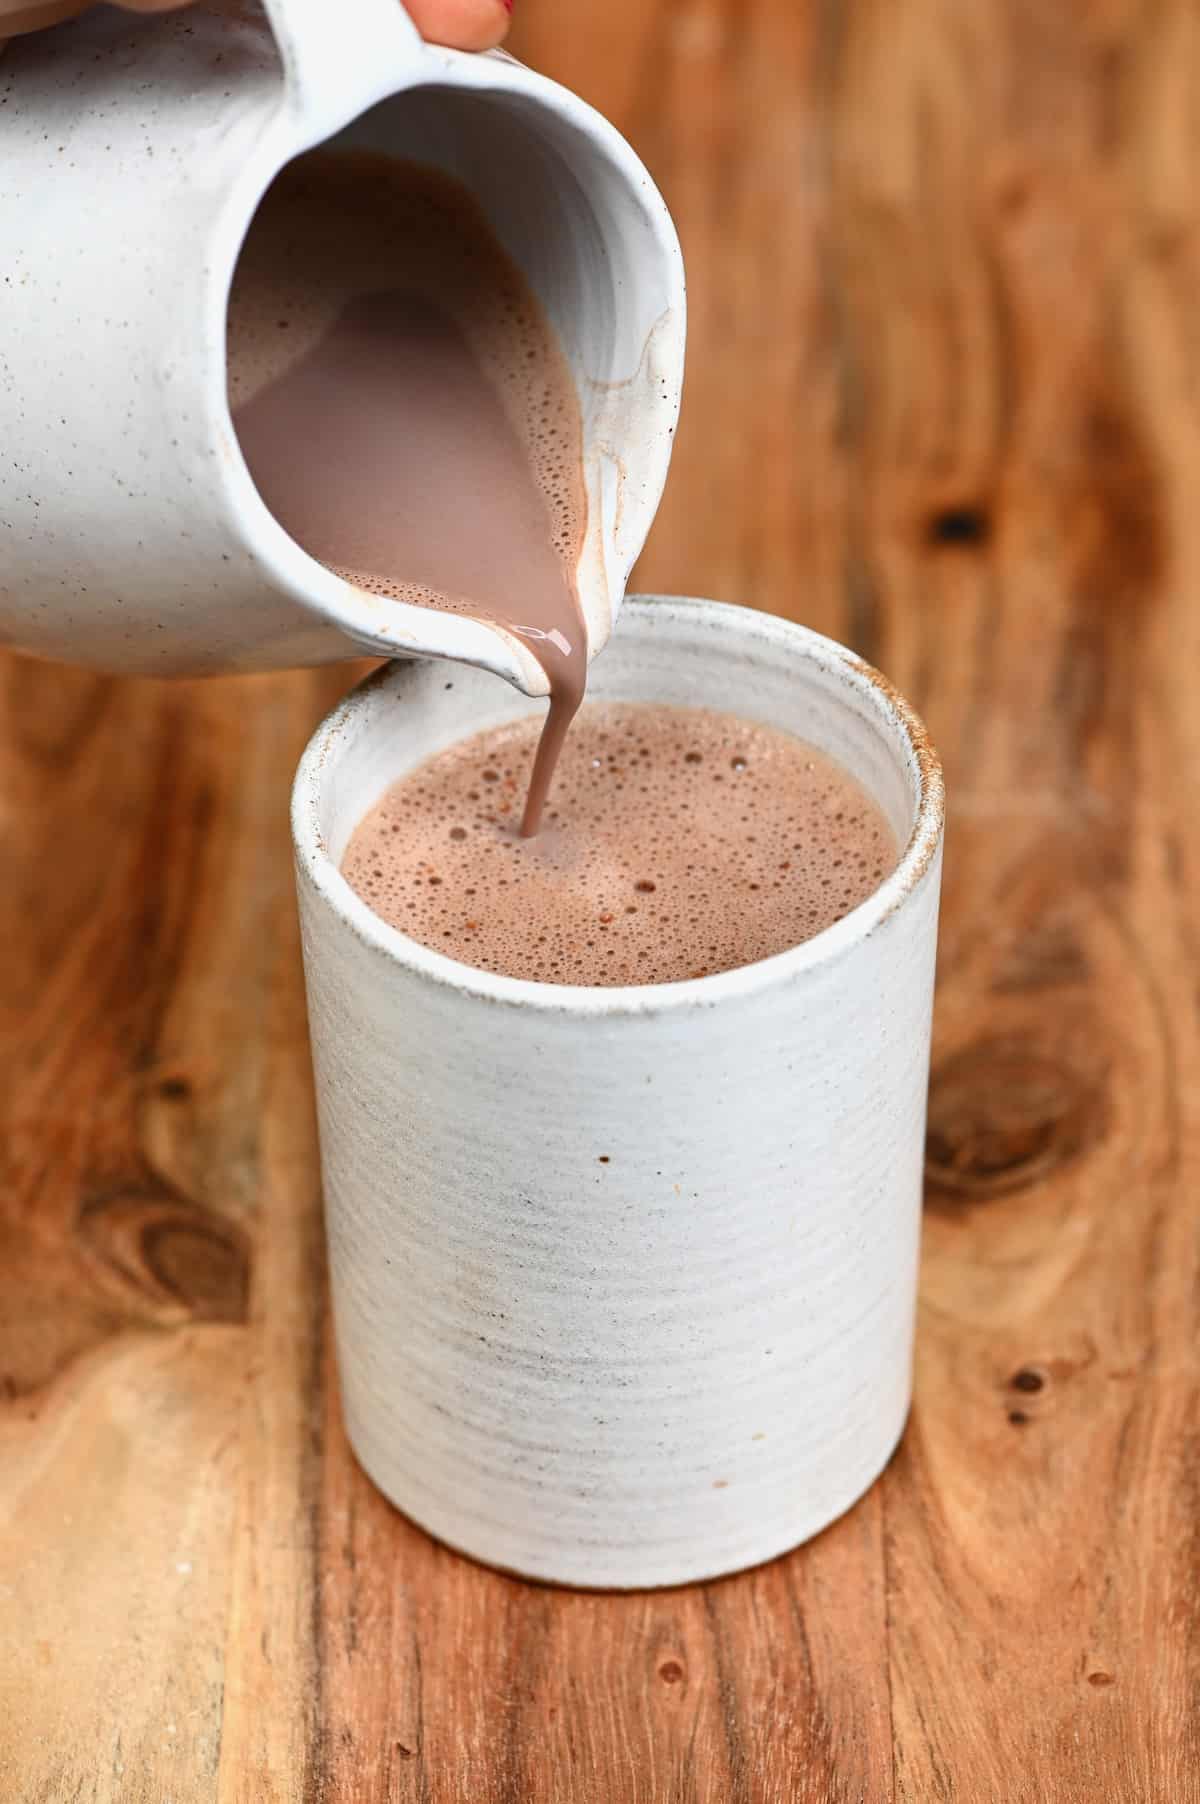 Pouring hot chocolate in a cup from a small pitcher